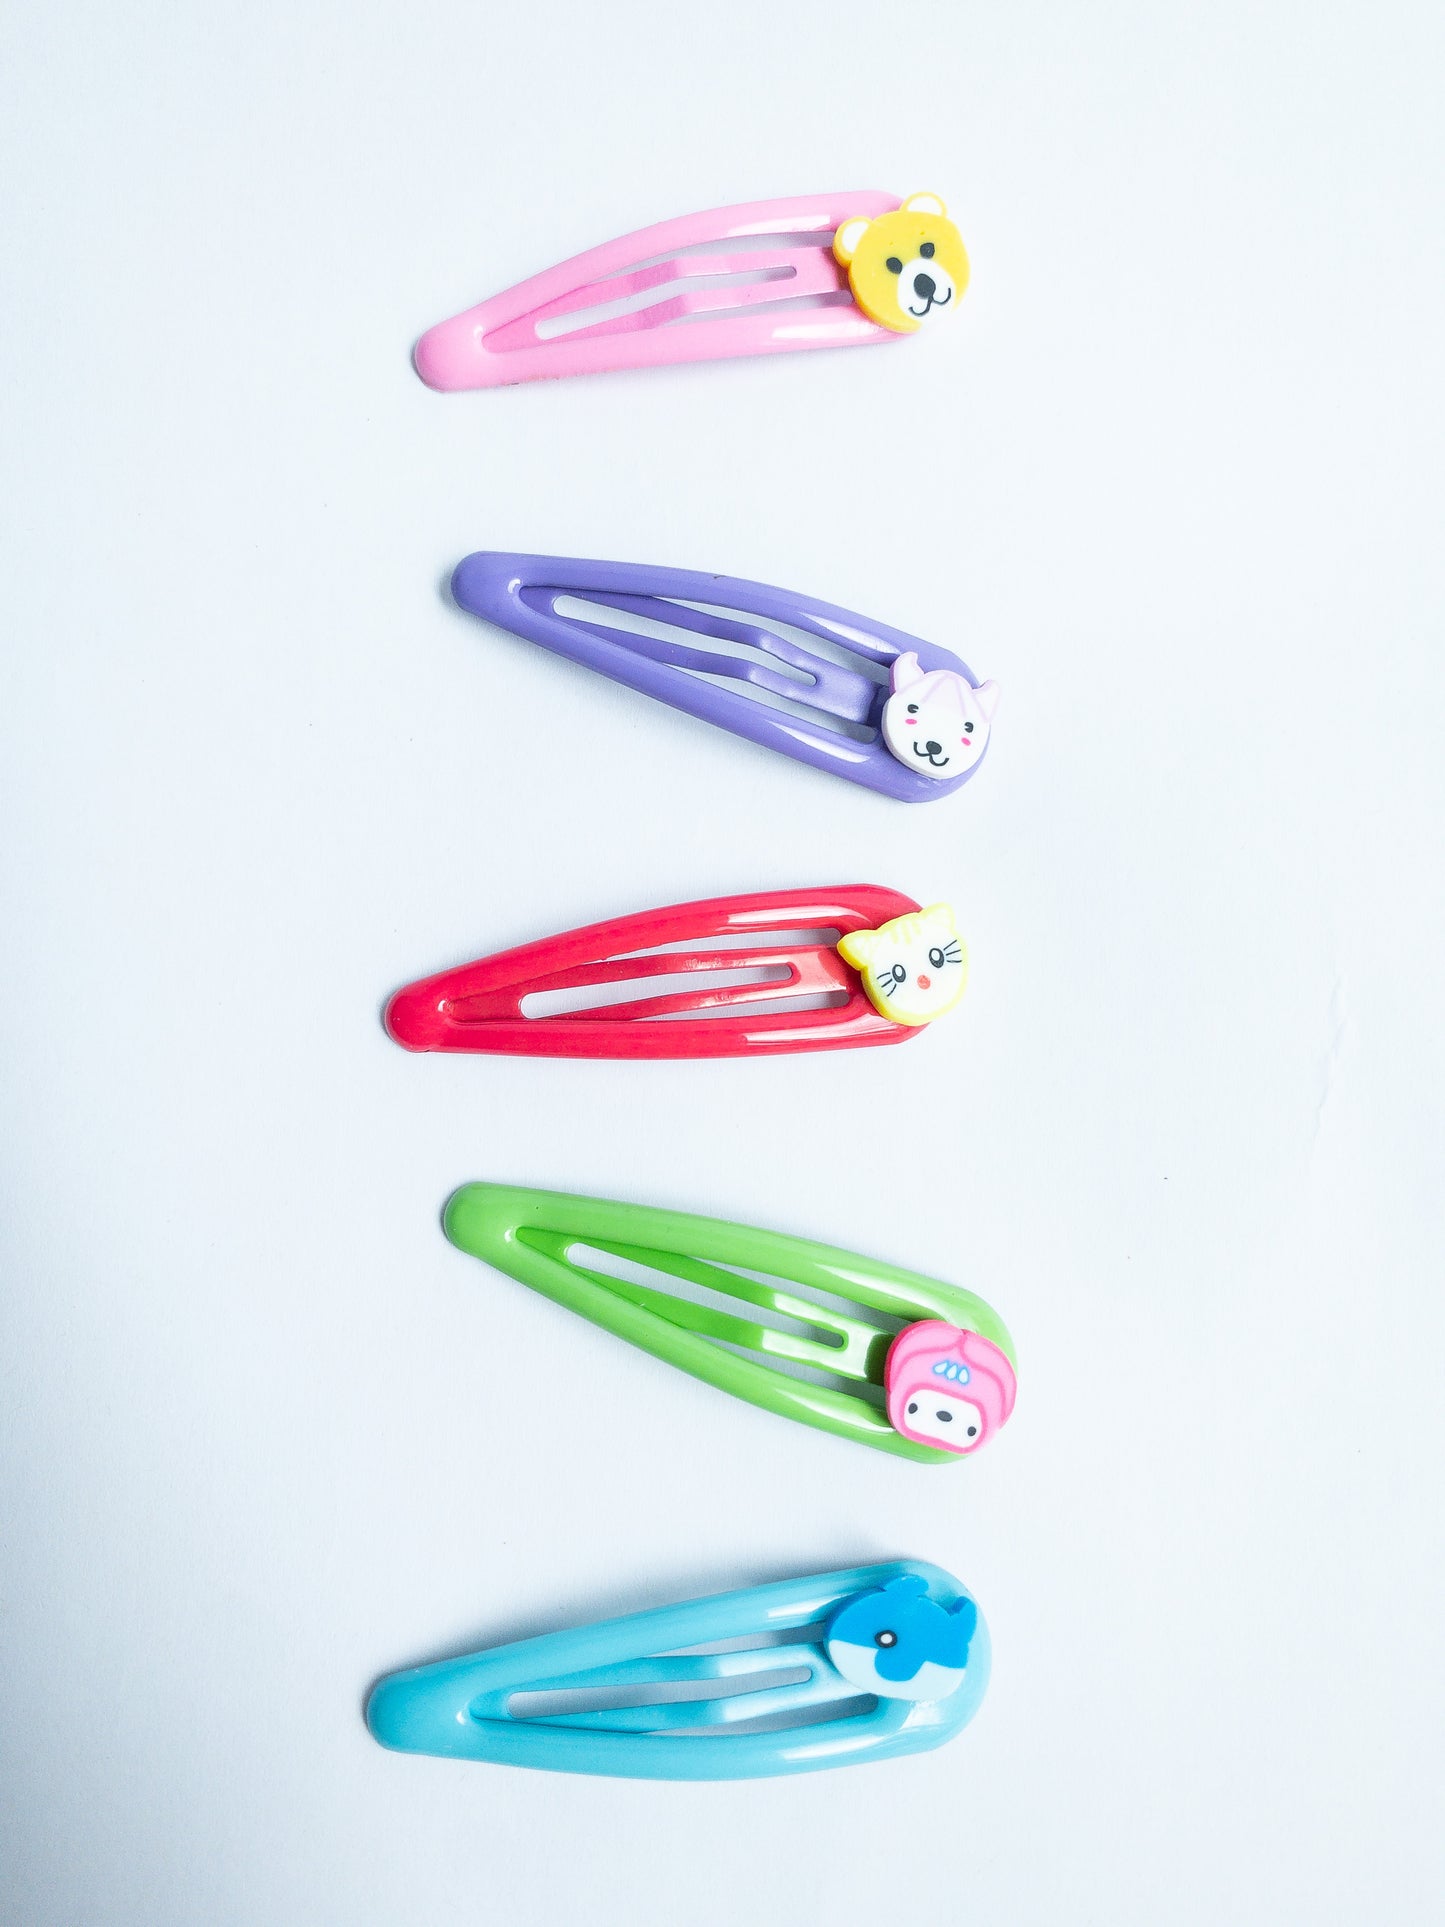 Adorn your 'do with these cute little animal hair clips! Featuring an array of critters, these super-cute clips are perfect for adding a bit of fun to your look. Five bright colored snap clips.